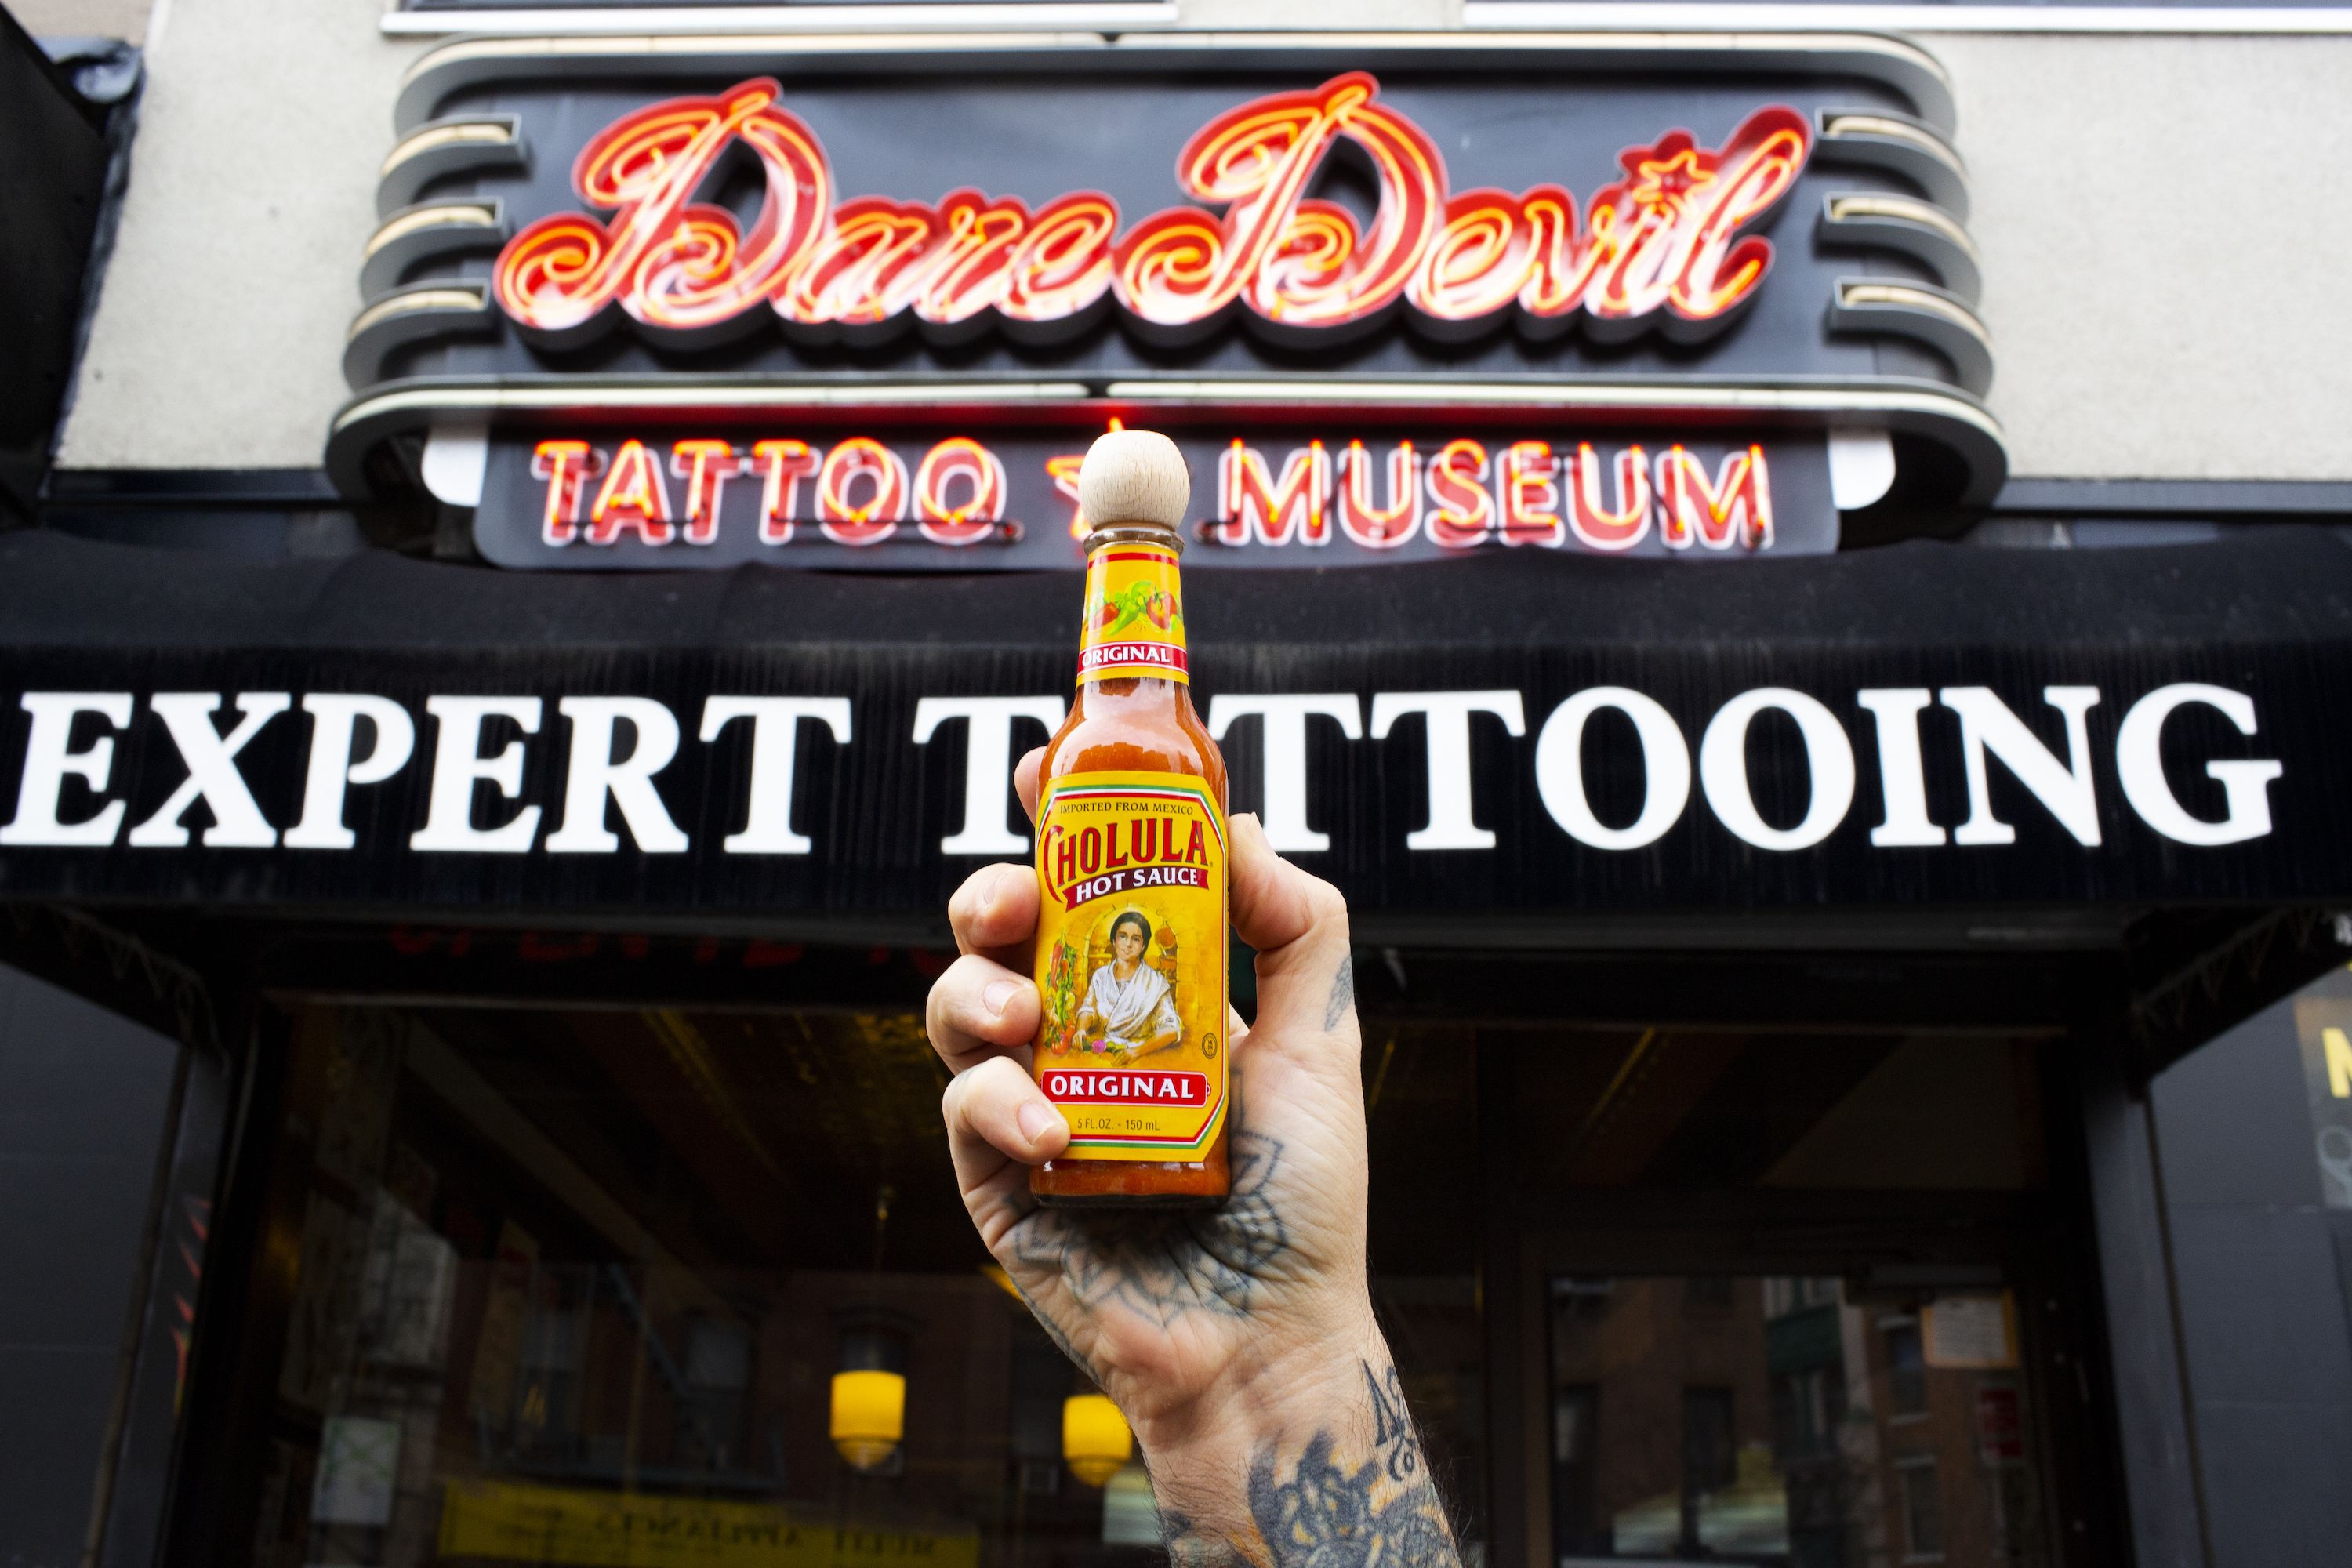 Free hot sauce for life if you get the right tattoo